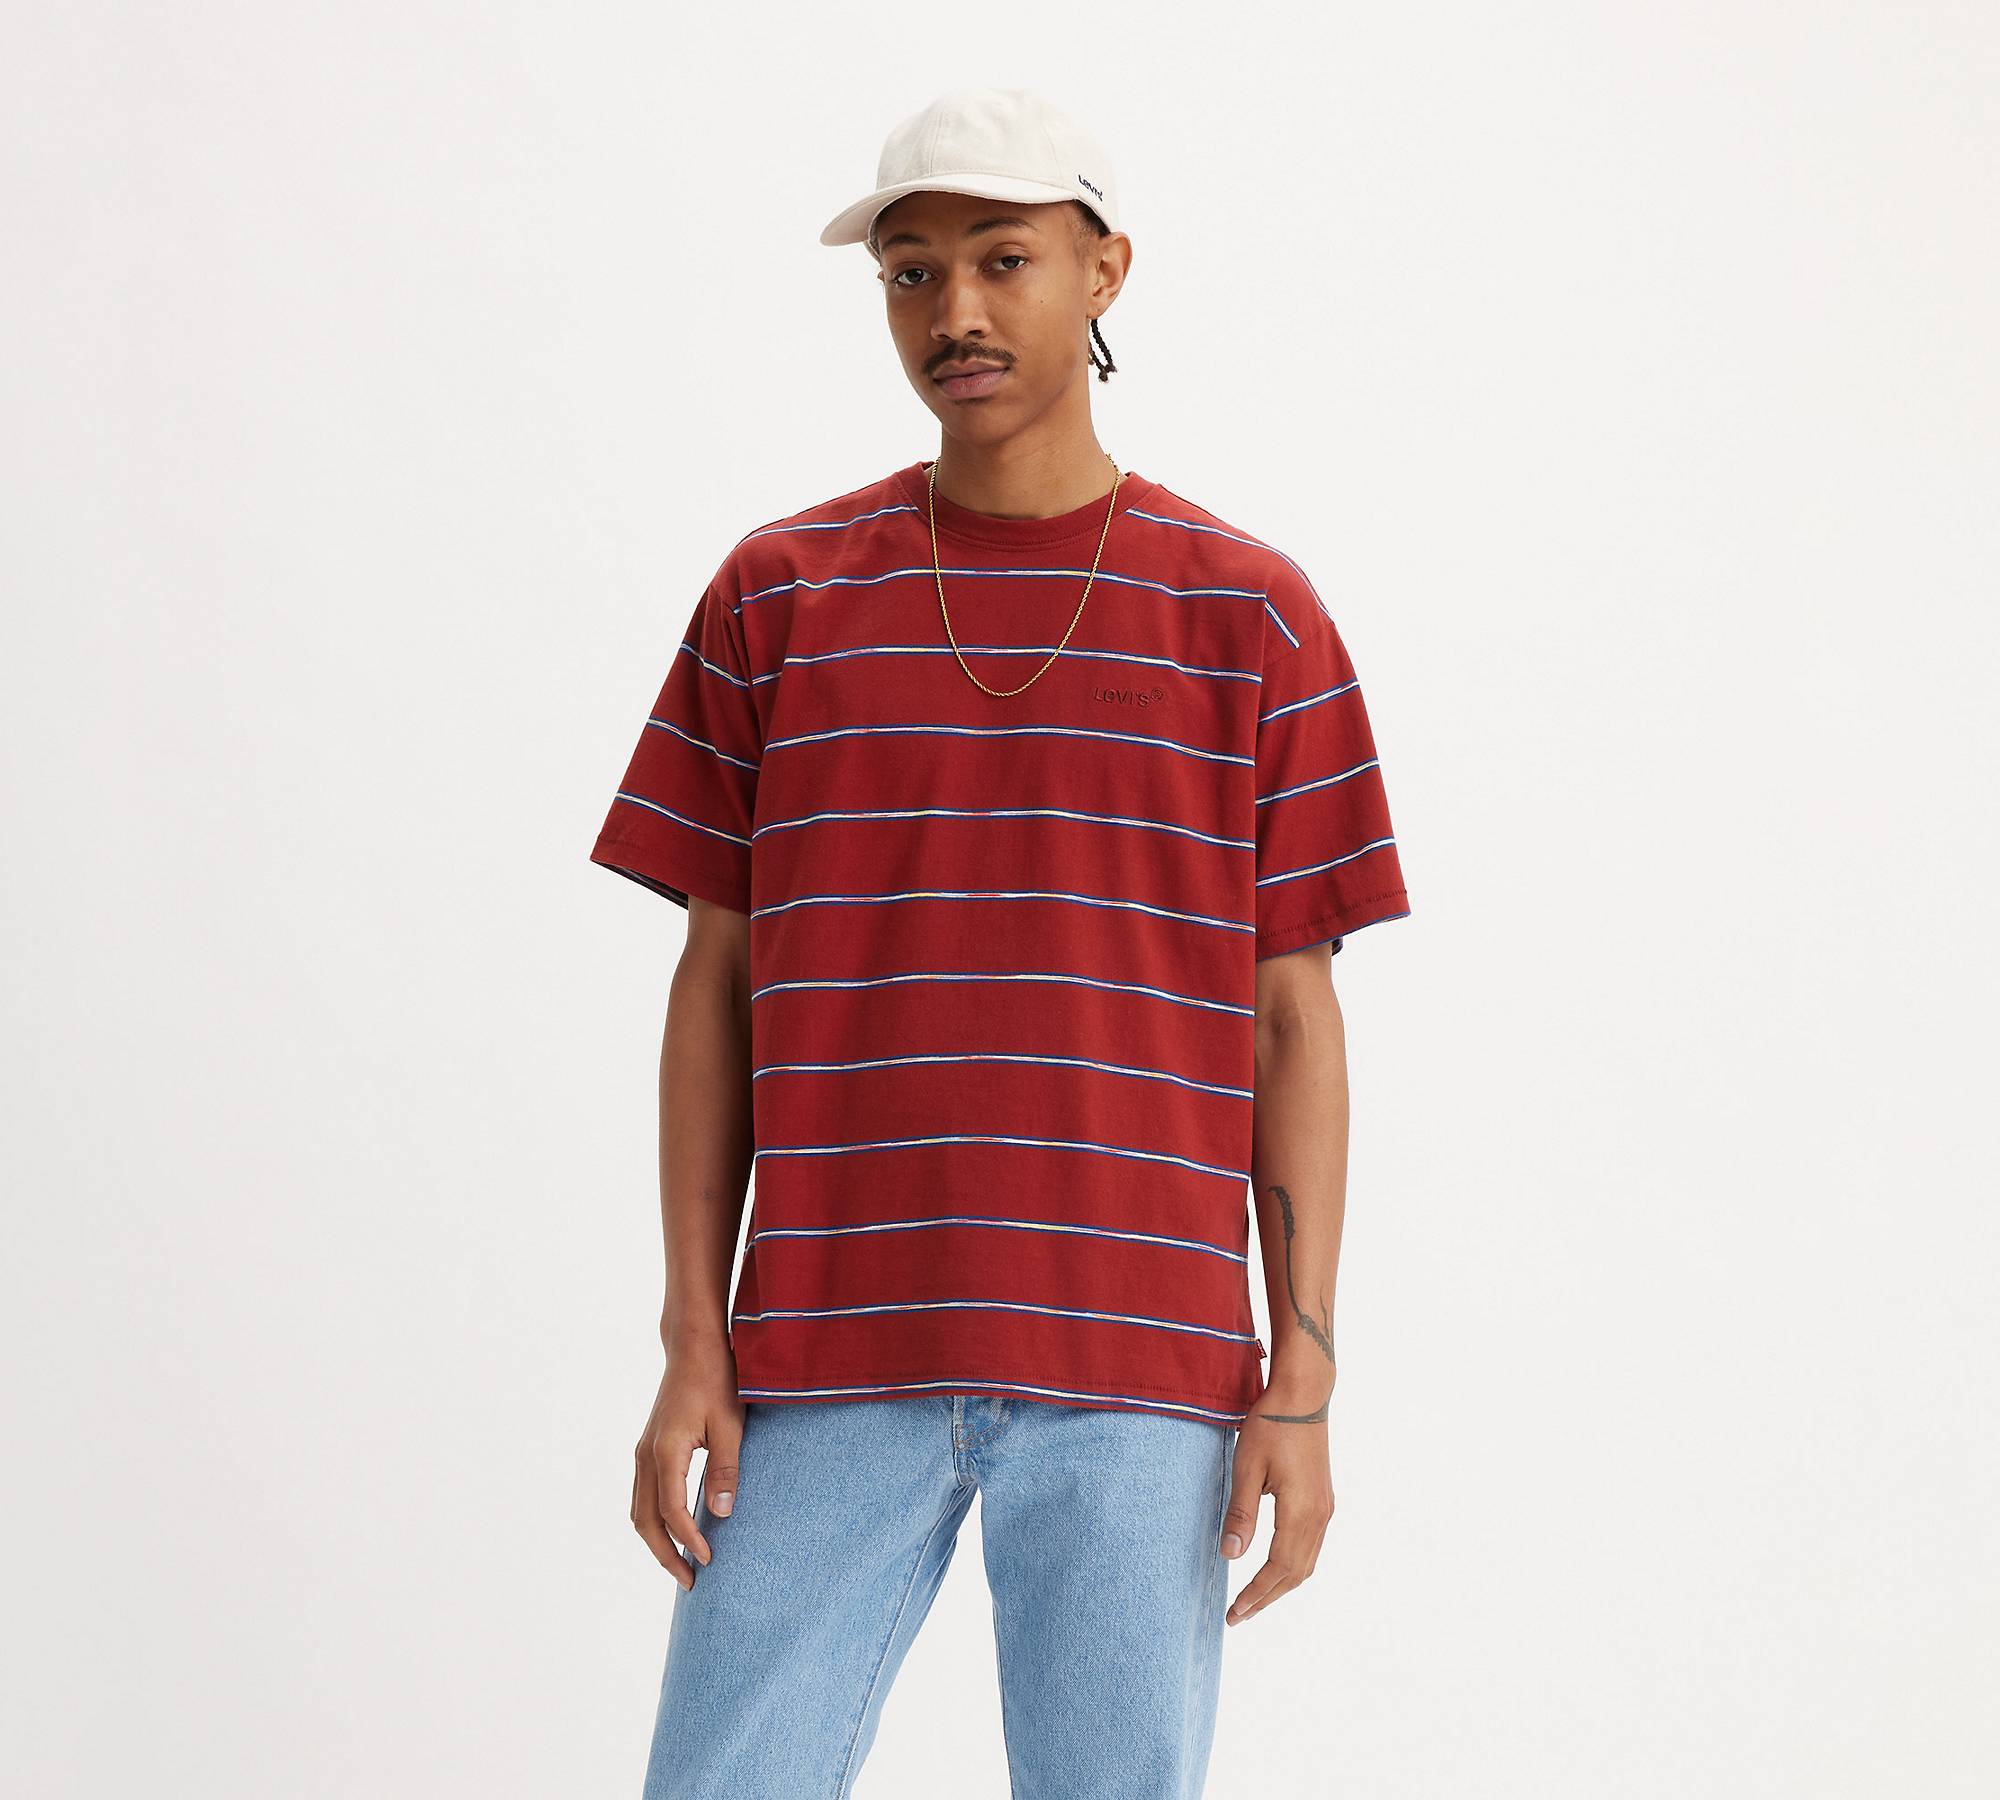 Striped Red Tab™ Vintage T-shirt - Multi-color | Levi's® US